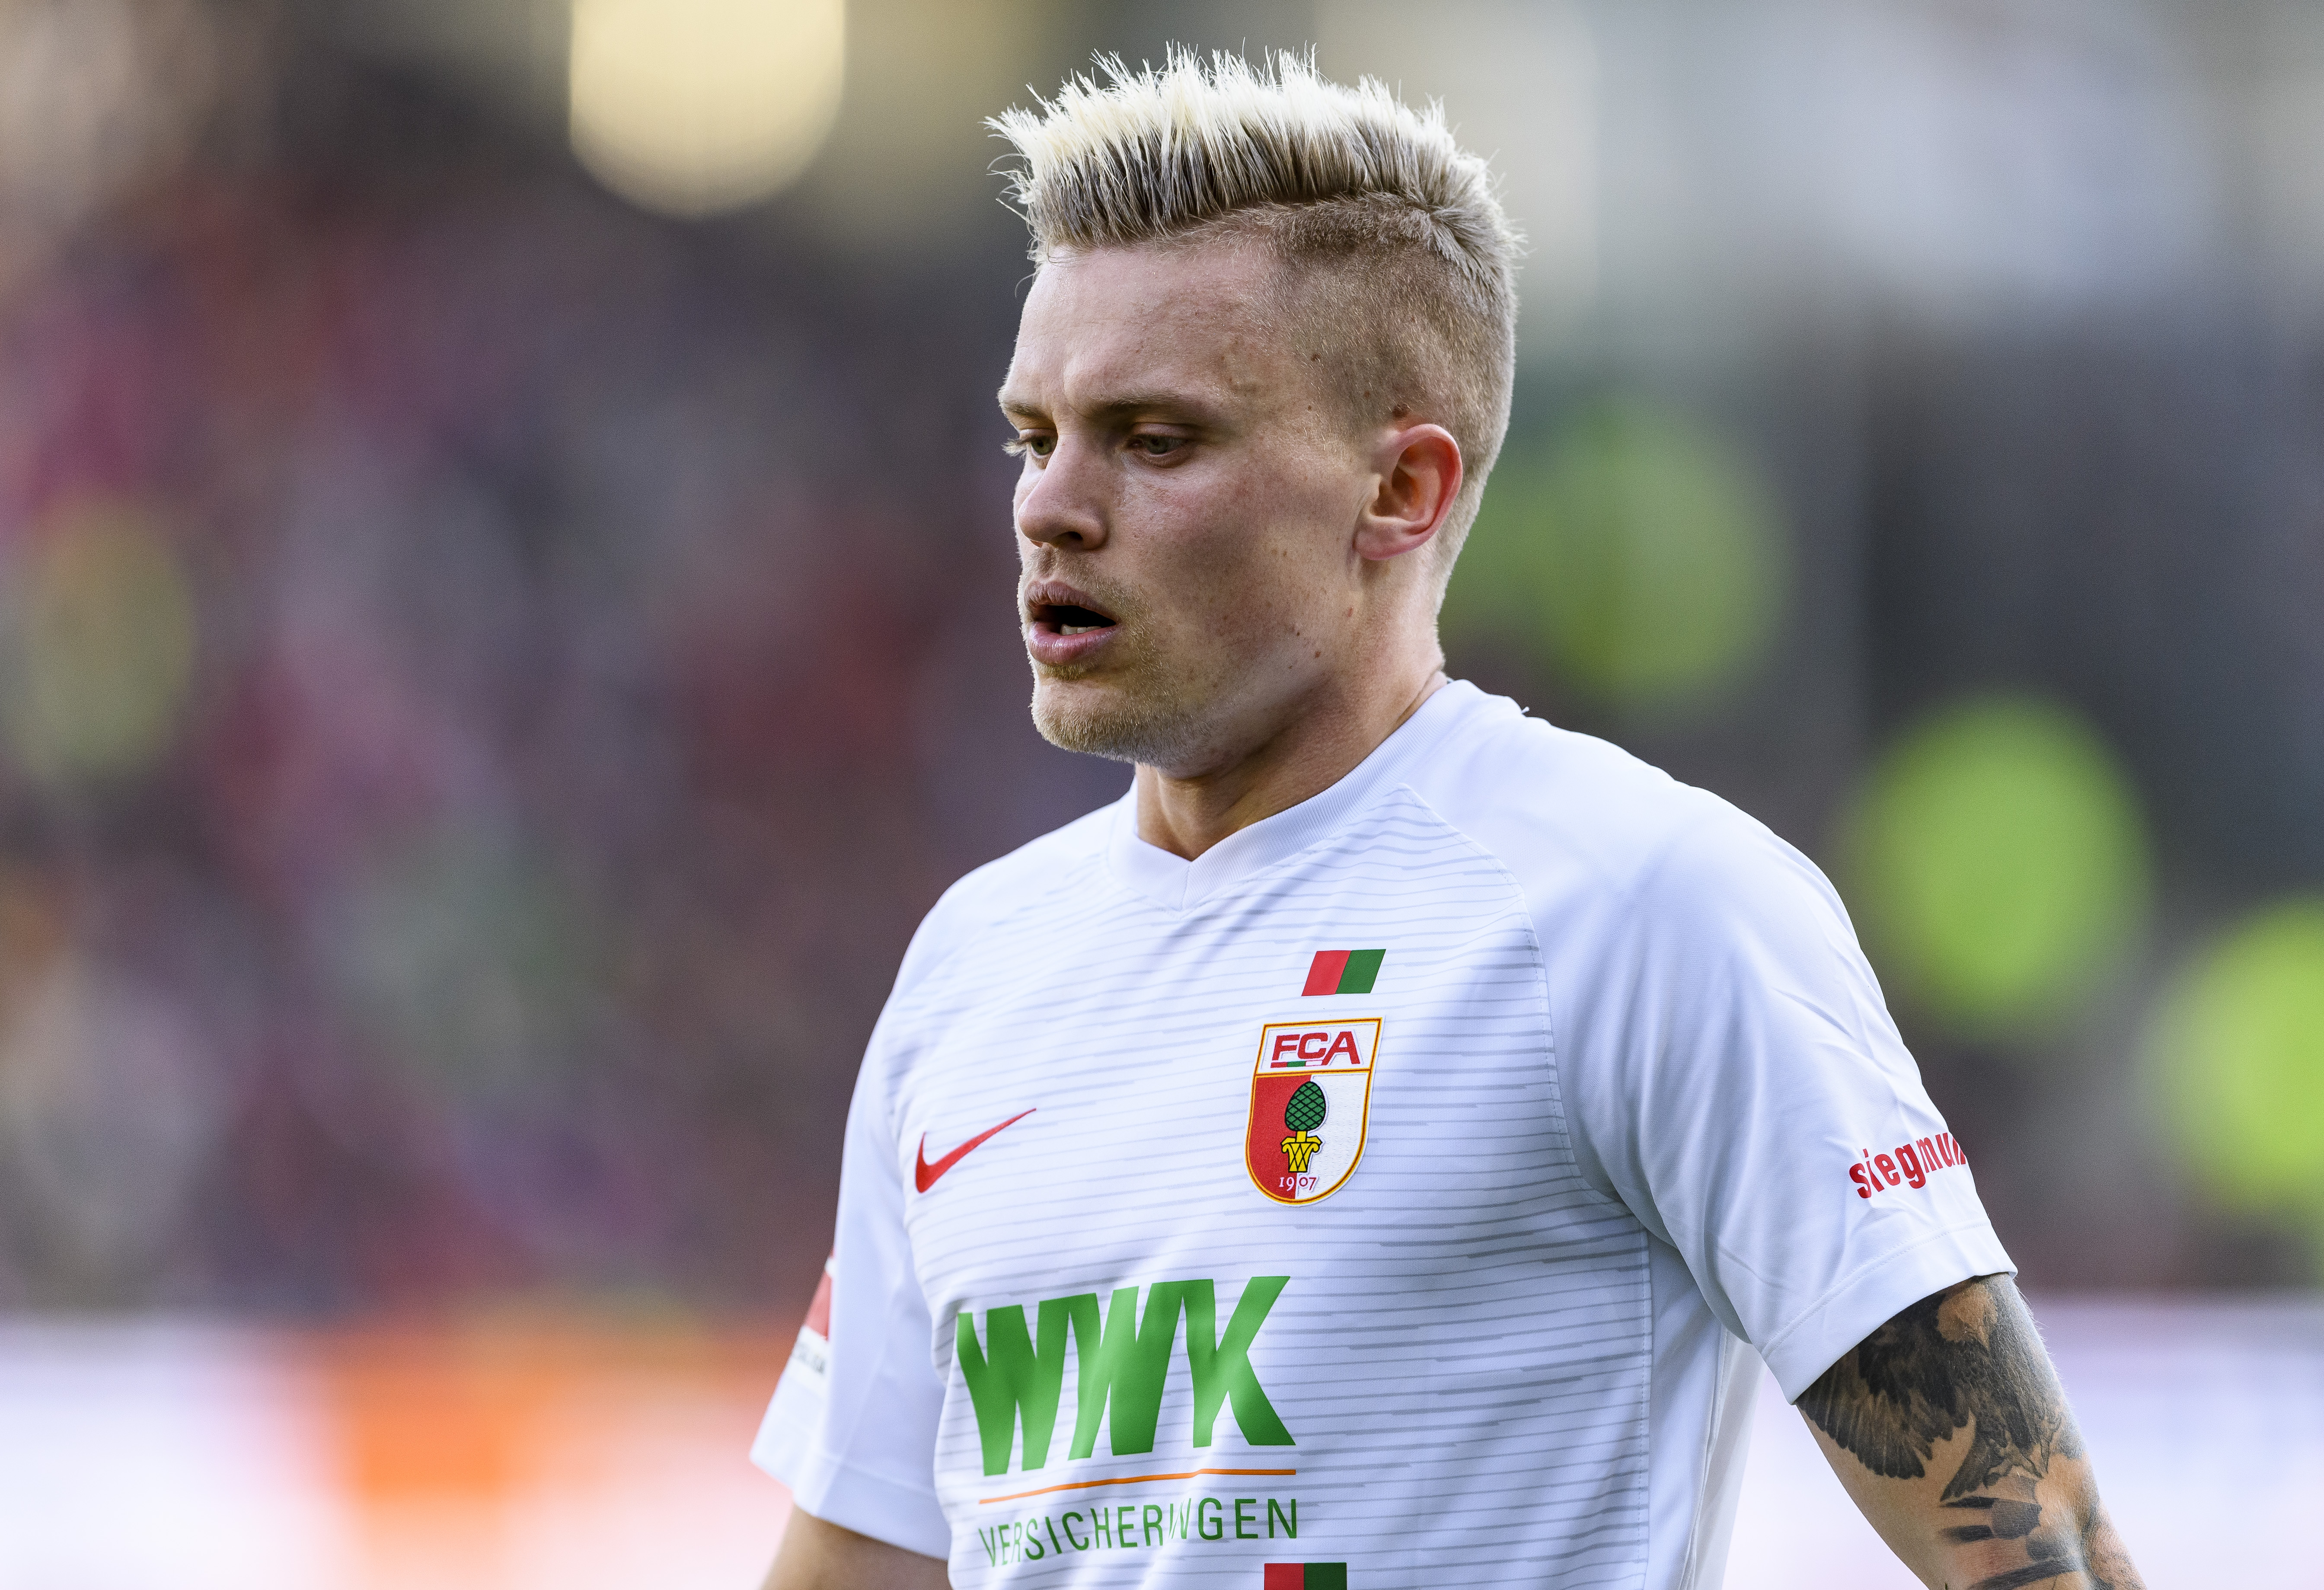 Philipp Max of Augsburg is seen during the Bundesliga match between Sport-Club Freiburg and FC Augsburg at Schwarzwald-Stadion on February 23, 2019. (Getty Images)